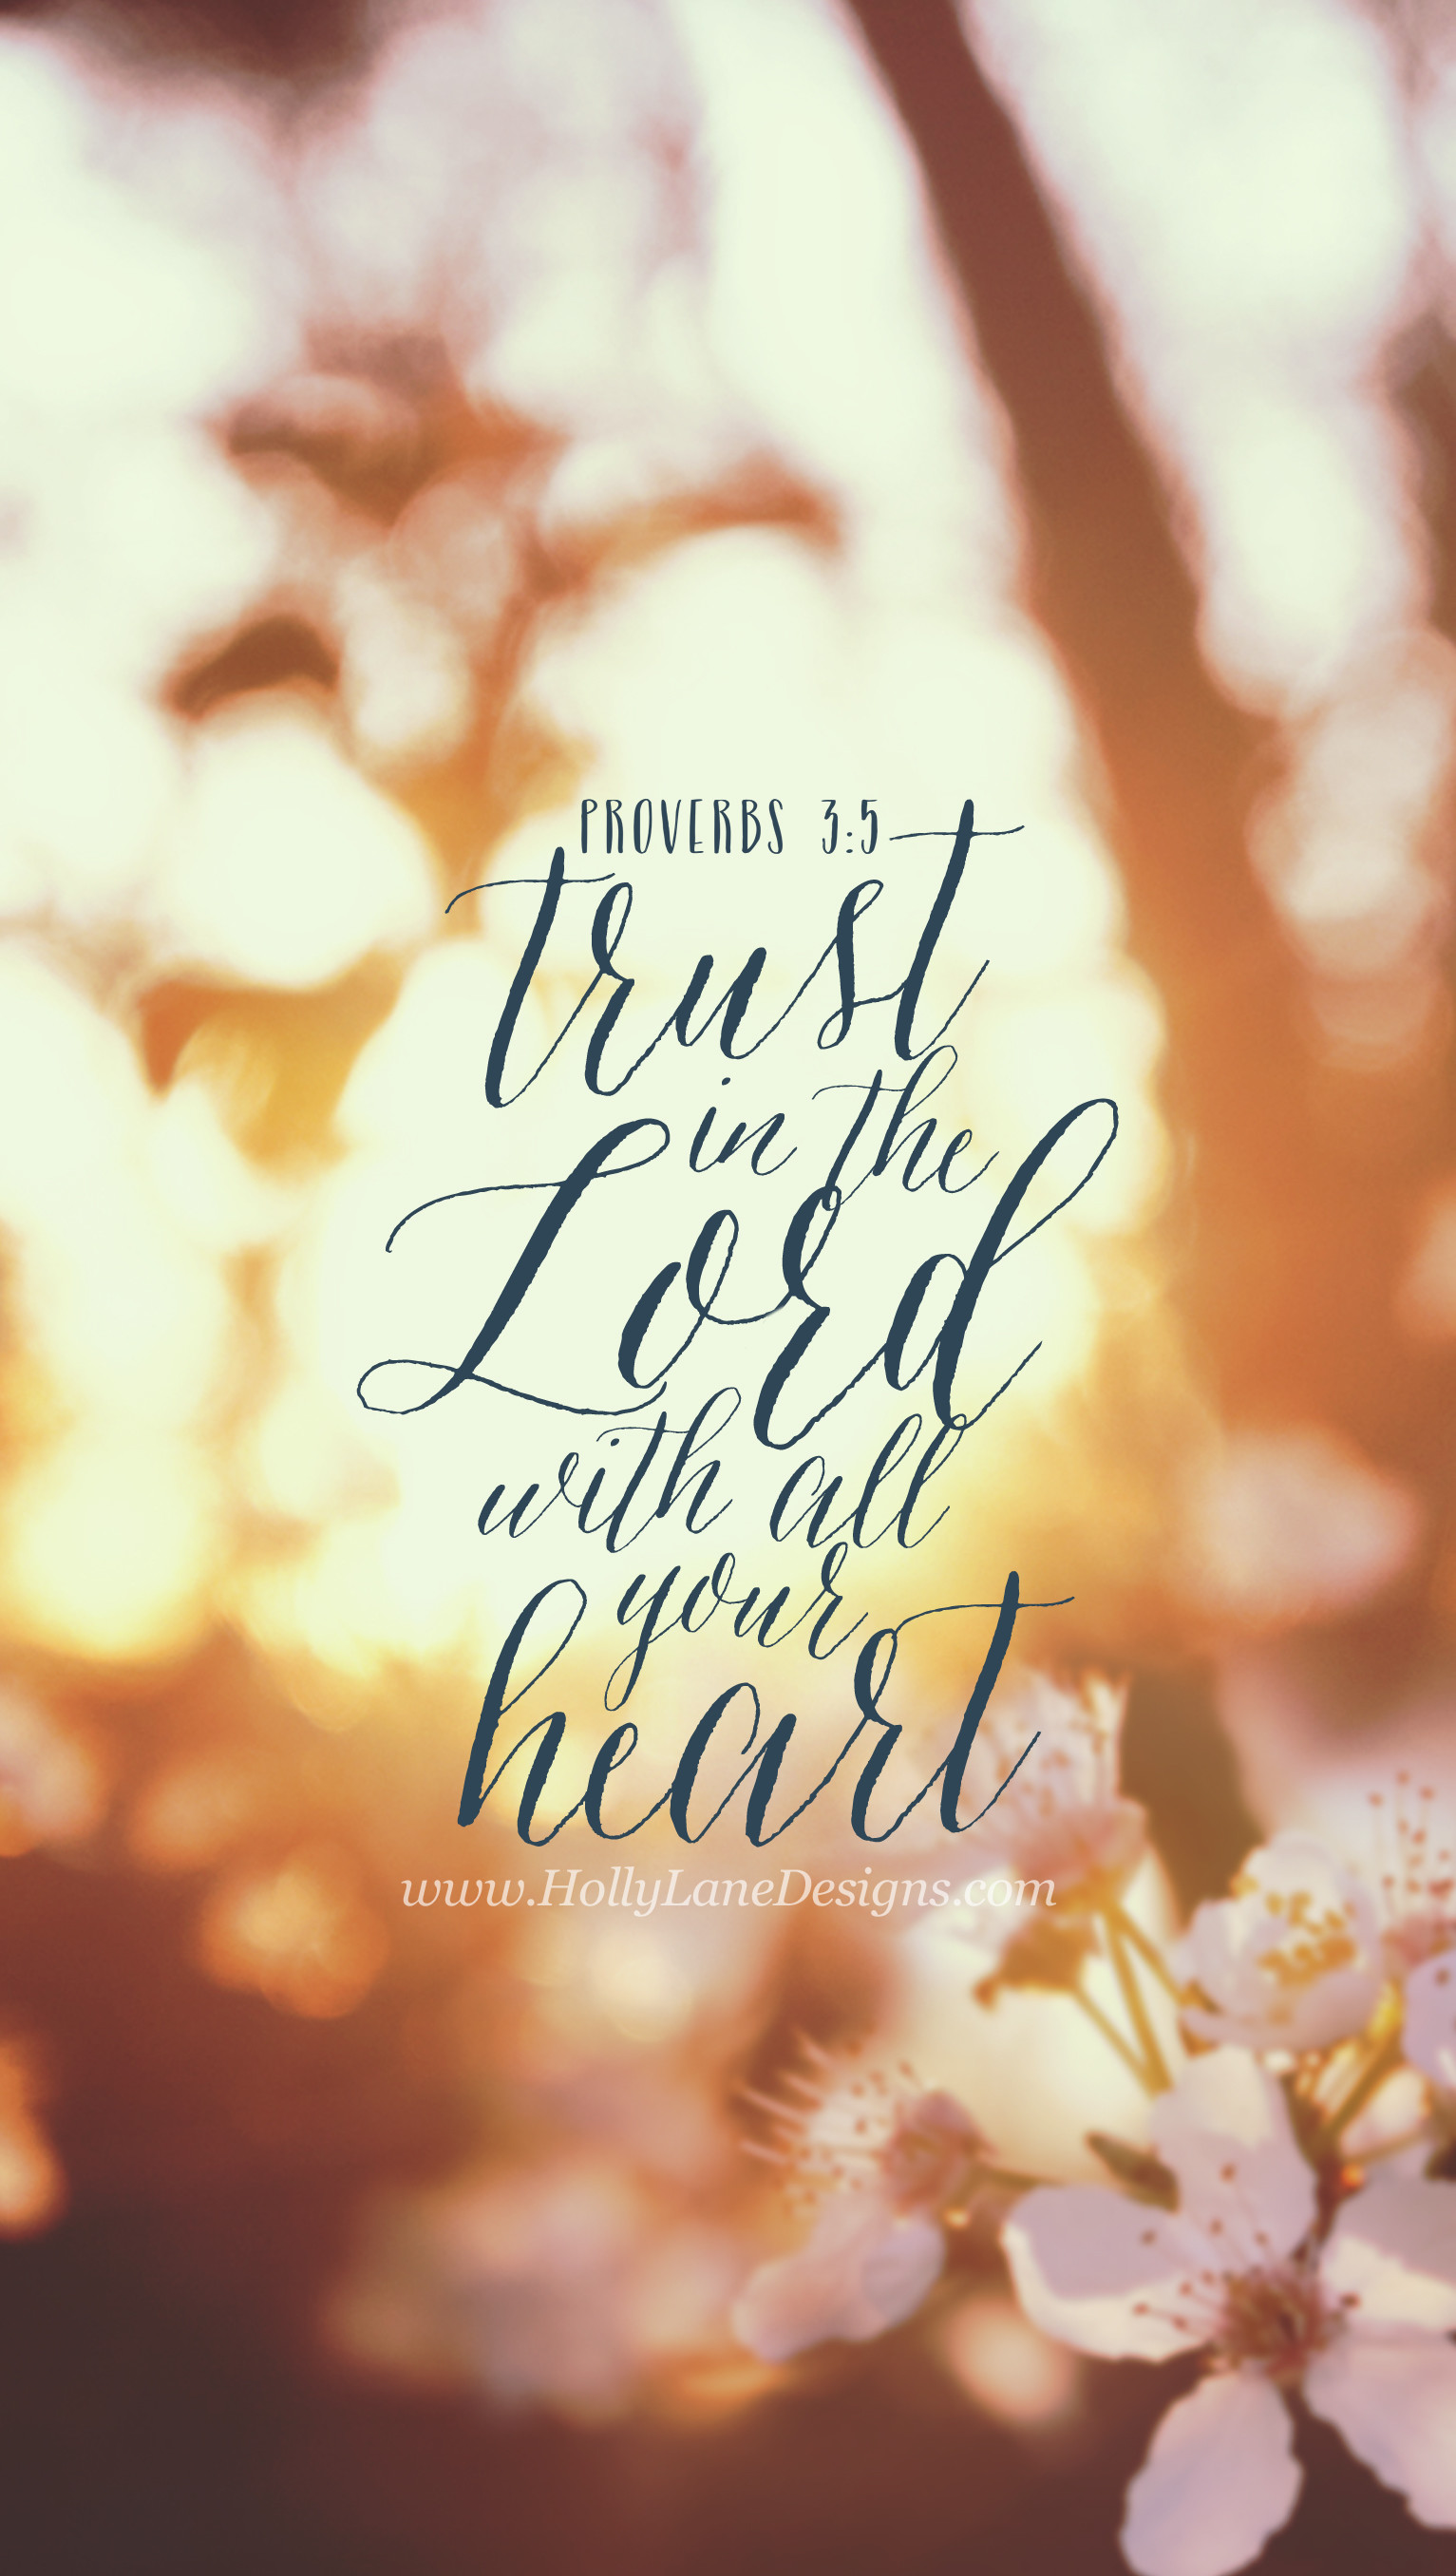 Trust In The Lord - Bible Verses Wallpaper Iphone 6 - HD Wallpaper 